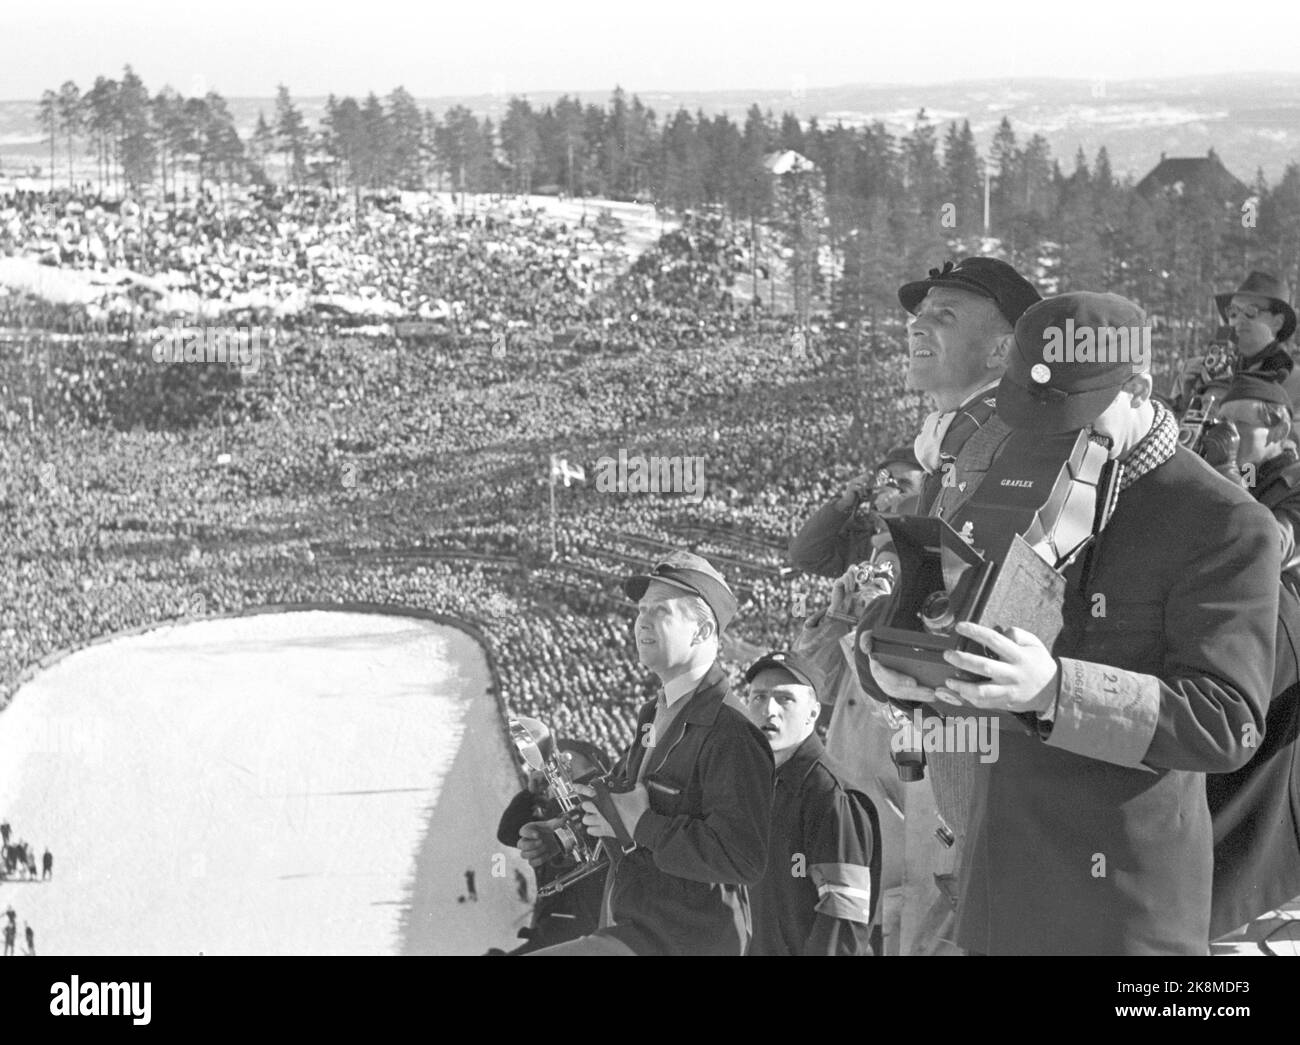 Holmenkollen, Oslo 19500318. Jumping in Holmenkollbakken. The wind was blowing away the entire Holmenkollrennet, but after three hours of postponement it quieted off. 90,000 spectators in the stands and at Sletta were present. Here we see press photographers in the jump hill who will photograph the events. Photo: Sverre A. Børretzen / Current / NTB Stock Photo